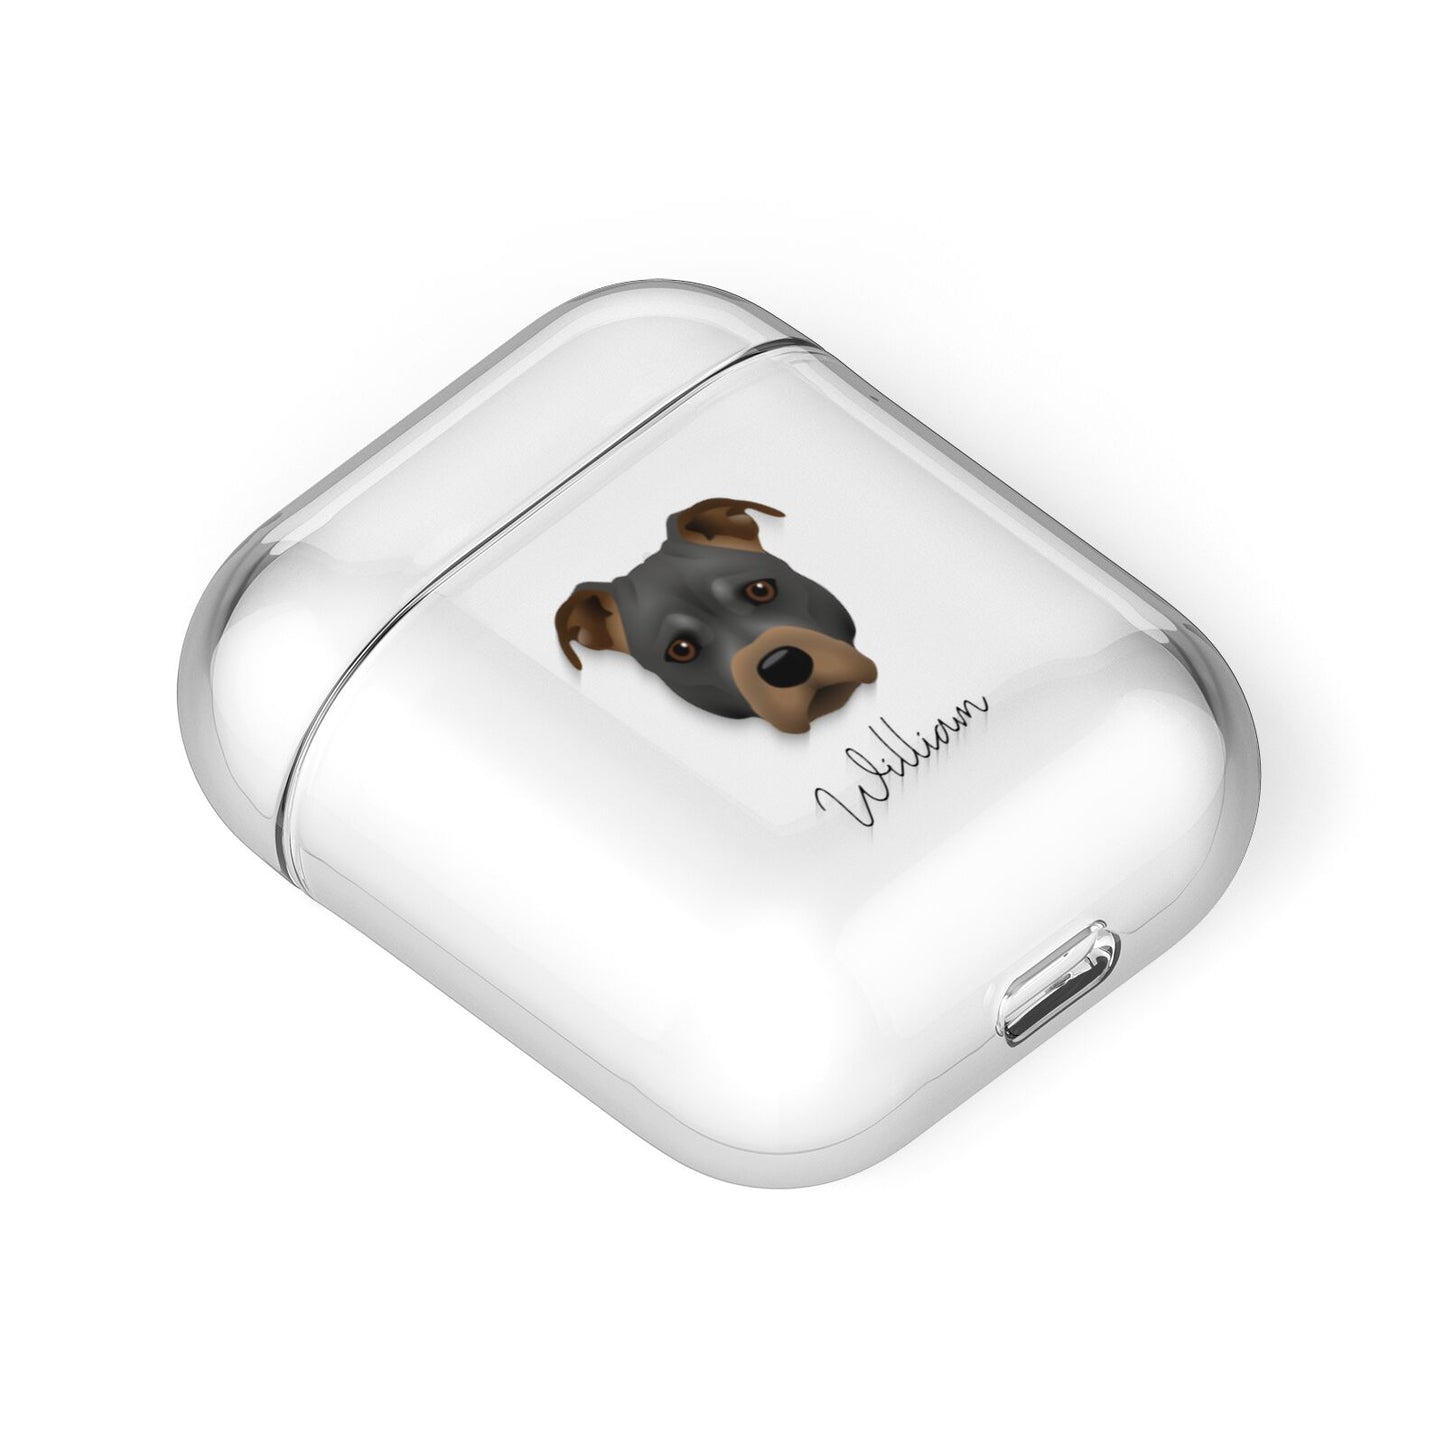 Staffordshire Bull Terrier Personalised AirPods Case Laid Flat